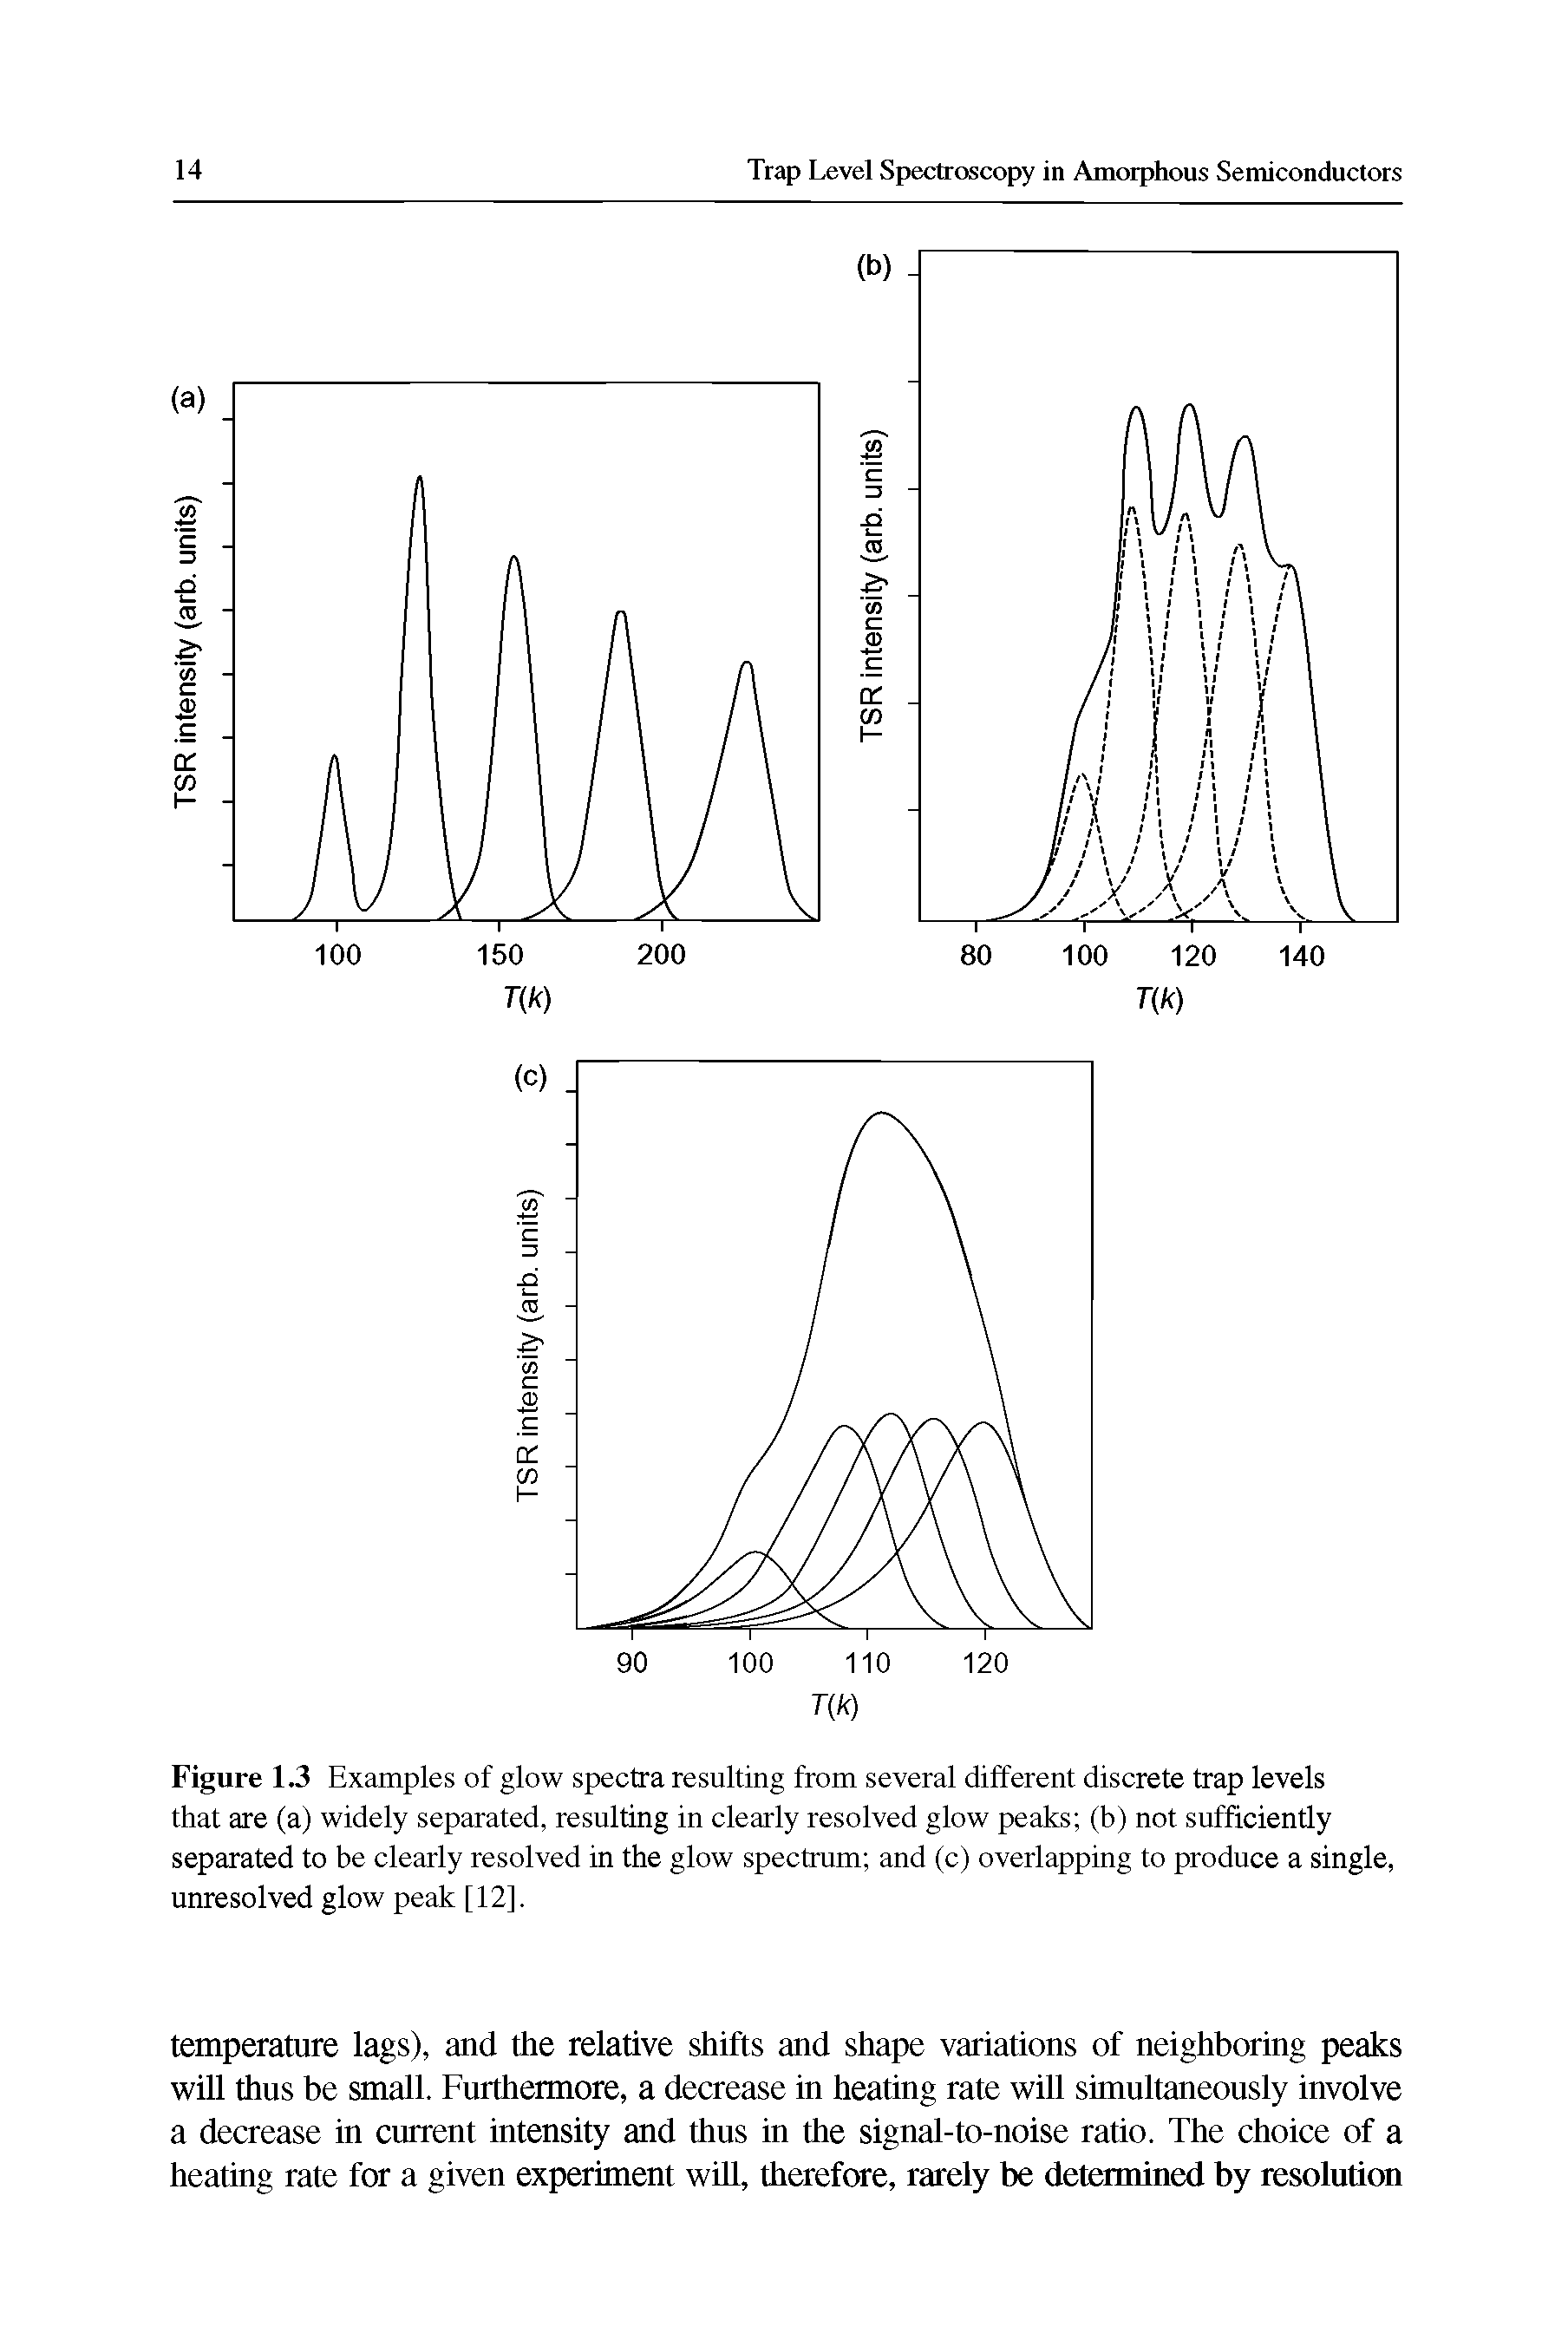 Figure 1.3 Examples of glow spectra resulting from several different discrete trap levels that are (a) widely separated, resulting in clearly resolved glow peaks (b) not sufficiently separated to be clearly resolved in the glow spectrum and (c) overlapping to produce a single, unresolved glow peak [12].